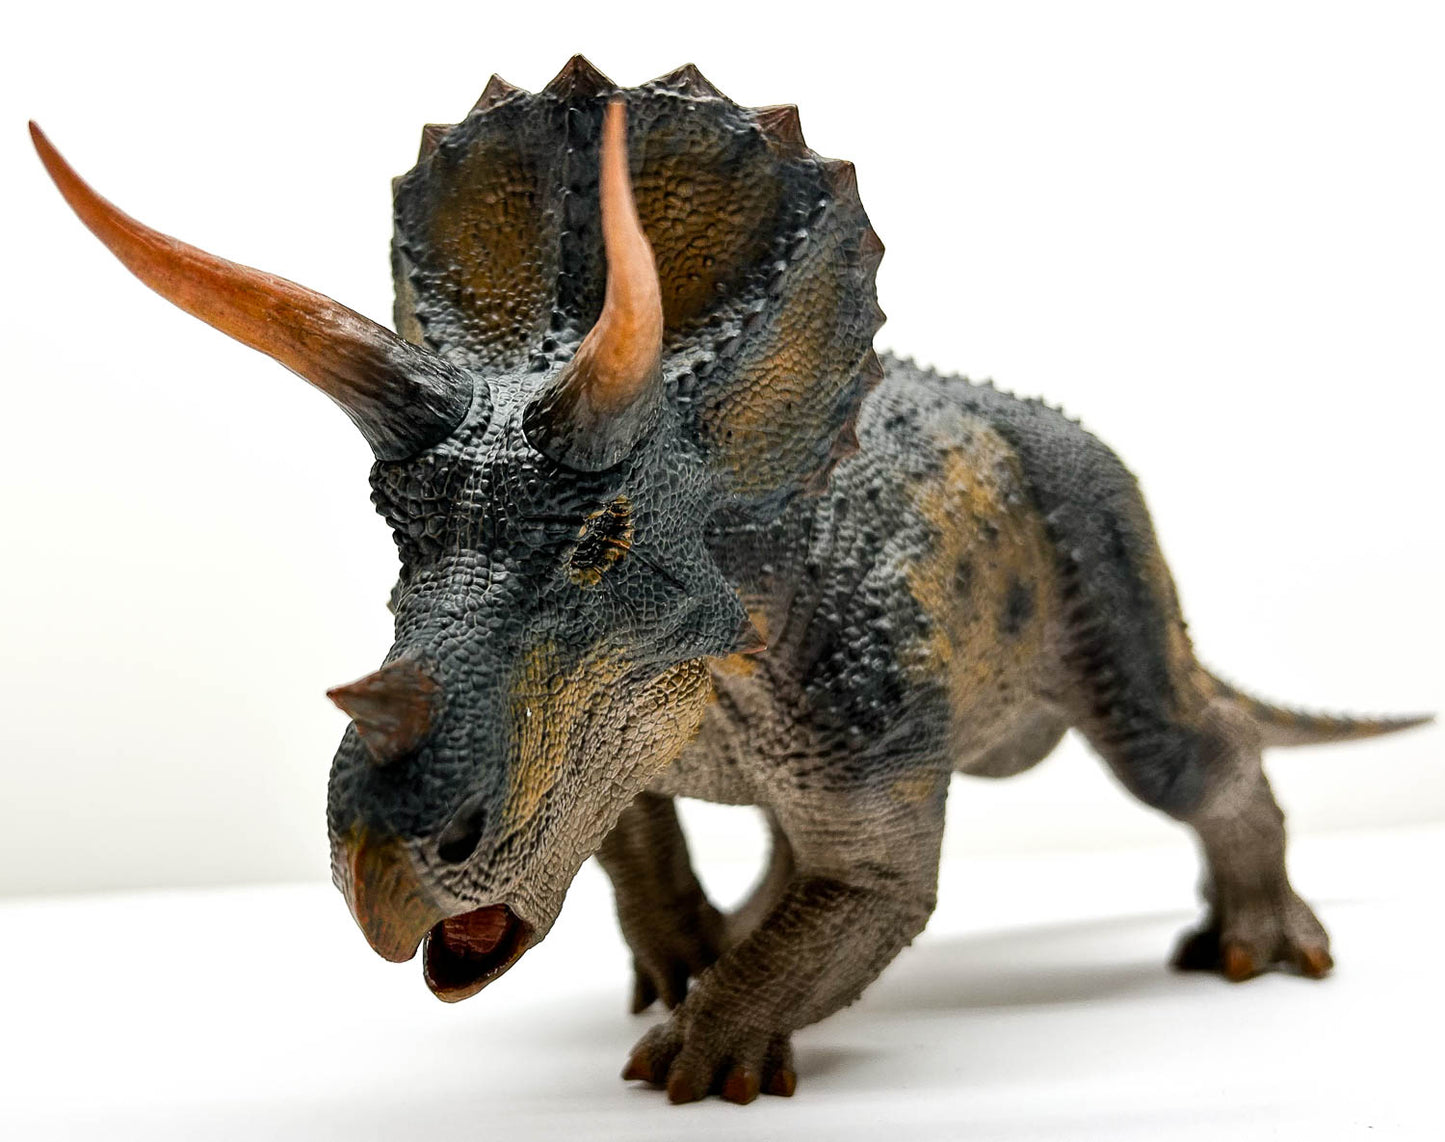 Triceratops, Male ~ "Trident King"